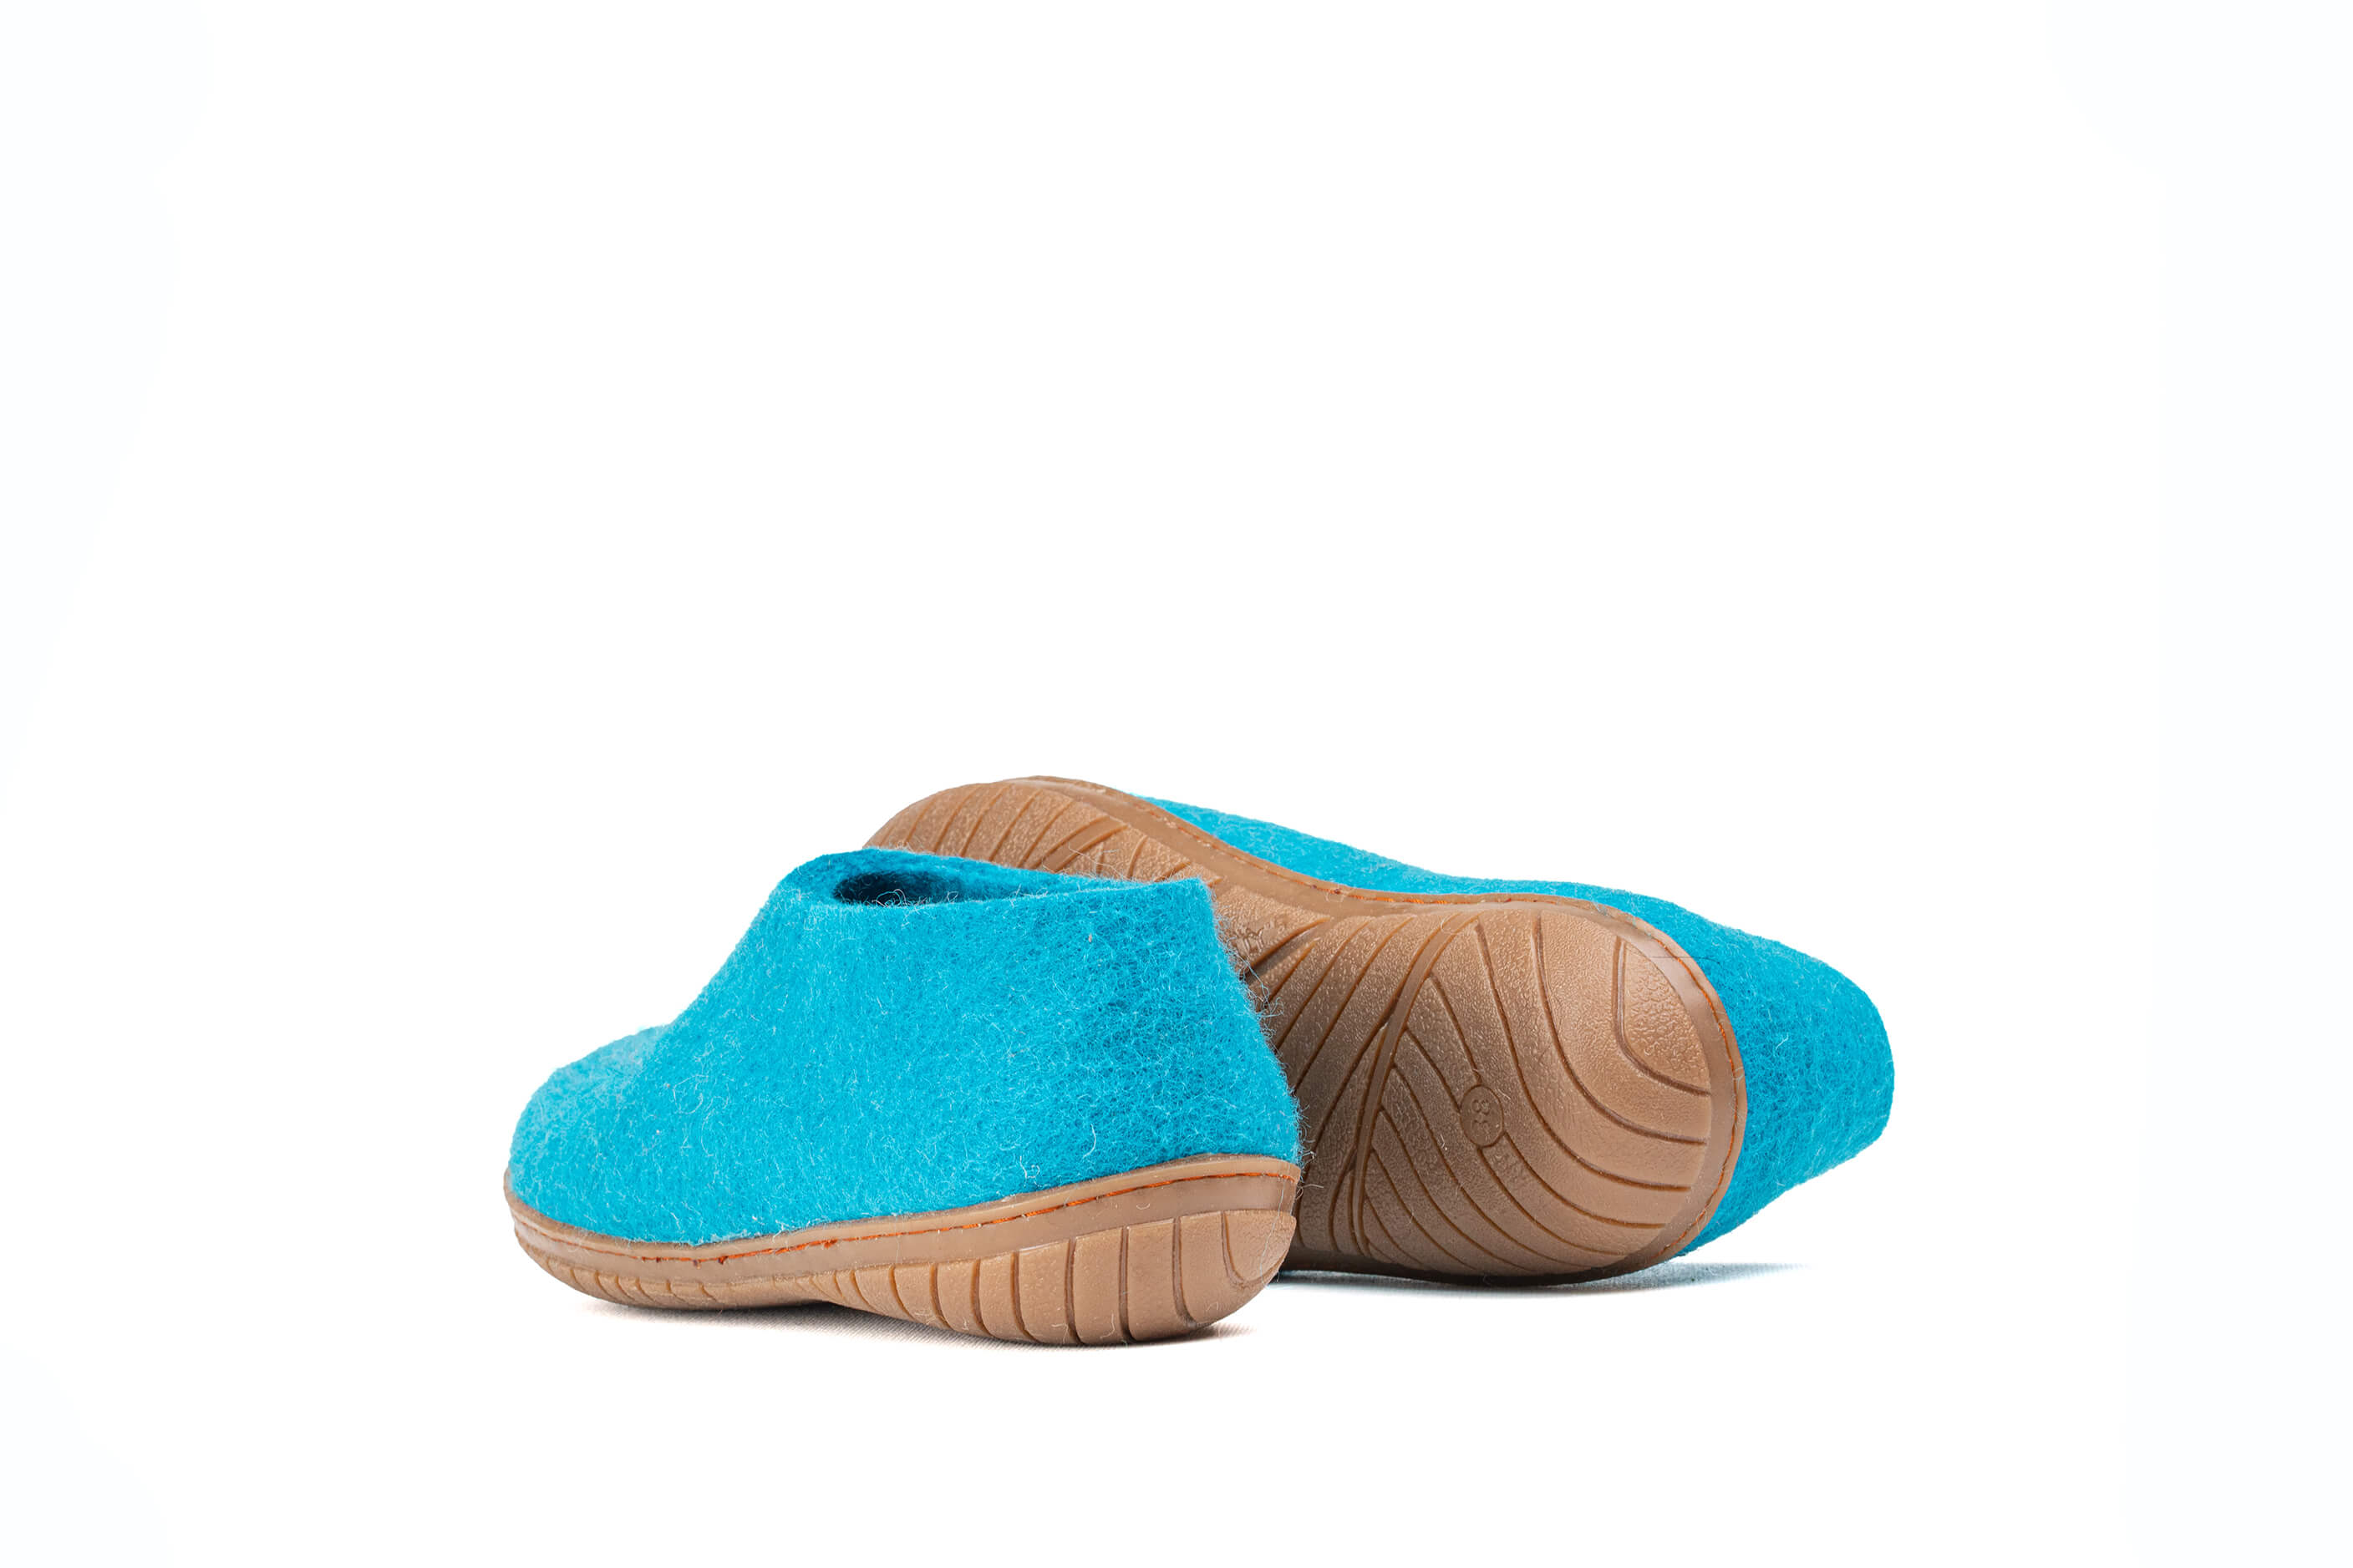 Outdoor Shoes With Rubber Sole - Turquoise